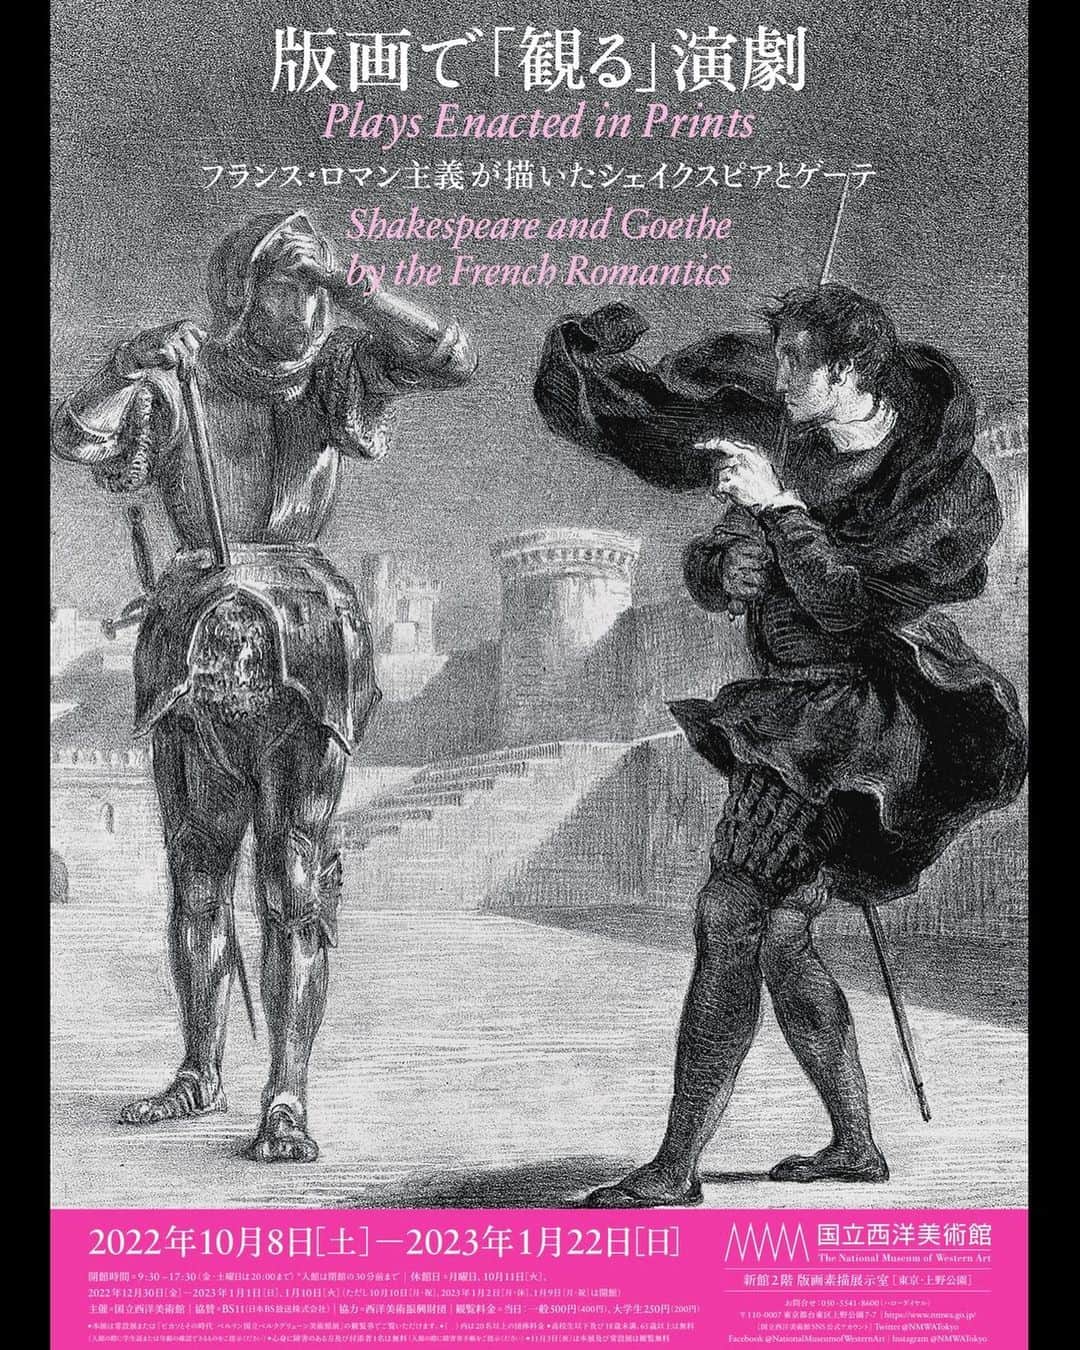 浅野菜緒子さんのインスタグラム写真 - (浅野菜緒子Instagram)「My first curated exhibition! I’m thrilled to announce that “Plays Enacted in Print: Shakespeare and Goethe by the French Romantics”, the exhibition I’ve curated for the first time will be held this October at the National Museum of Western Art, Tokyo!   Displaying some of the masterpieces from the Romantic prints including Delacroix’s Faust and Hamlet series as well as Chassériau’s Othello suite, the show will focus on the artists’ own interpretations of the dramatic languages and narratives of Shakespeare and Goethe, and the inspirations possibly drawn from contemporary stage productions and the French translations of the plays.  This will be the first occasion in the museum’s history where these three series are shown together.   Last but not least, we will be also hosting the production of “Hamlet” inspired by Delacroix’s prints, starring a wonderful performers from the Shakespeare Theatre, the renowned company founded by the late Norio Deguchi.   The exhibition will be held from Oct. 8th, 2022 to Jan. 22nd, 2023 in the Prints&Drawings Gallery, NMWA Tokyo. https://www.nmwa.go.jp/jp/exhibitions/2022watch.html  The production of Hamlet will be held on Oct. 21 and Dec. 3 (total 4 performances).  https://www.nmwa.go.jp/jp/experience-learn/detail/event_13.html  初めて企画構成を担当した展覧会が10月から始まります！  ただいま絶賛パネル校正中ですが…ついつい嬉しくなってスポットごとに撮影📸   ドラクロワとシャセリオーというフランス・ロマン主義の逸材たちがシェイクスピア／ゲーテの戯曲に霊感を得て生み出した版画連作を中心に、19世紀当時の舞台表象や各作家の精読などに焦点を当てつつご紹介します。  次回企画展「ピカソとその時代」と同時期開催、企画展チケット／常設展チケット(なんと500円)でご覧いただけます。小企画展でさっくりお仕事帰りや動物園帰りに見れる規模なので、ぜひお越しください！  そして関連イベントとして演劇パフォーマンスも開催します🎭そちらもぜひ！  📜ポスターチラシのデザインは木村稔将さん。綺麗なスキャパレリピンクが嬉しいです🫶」9月16日 19時53分 - naokoasano